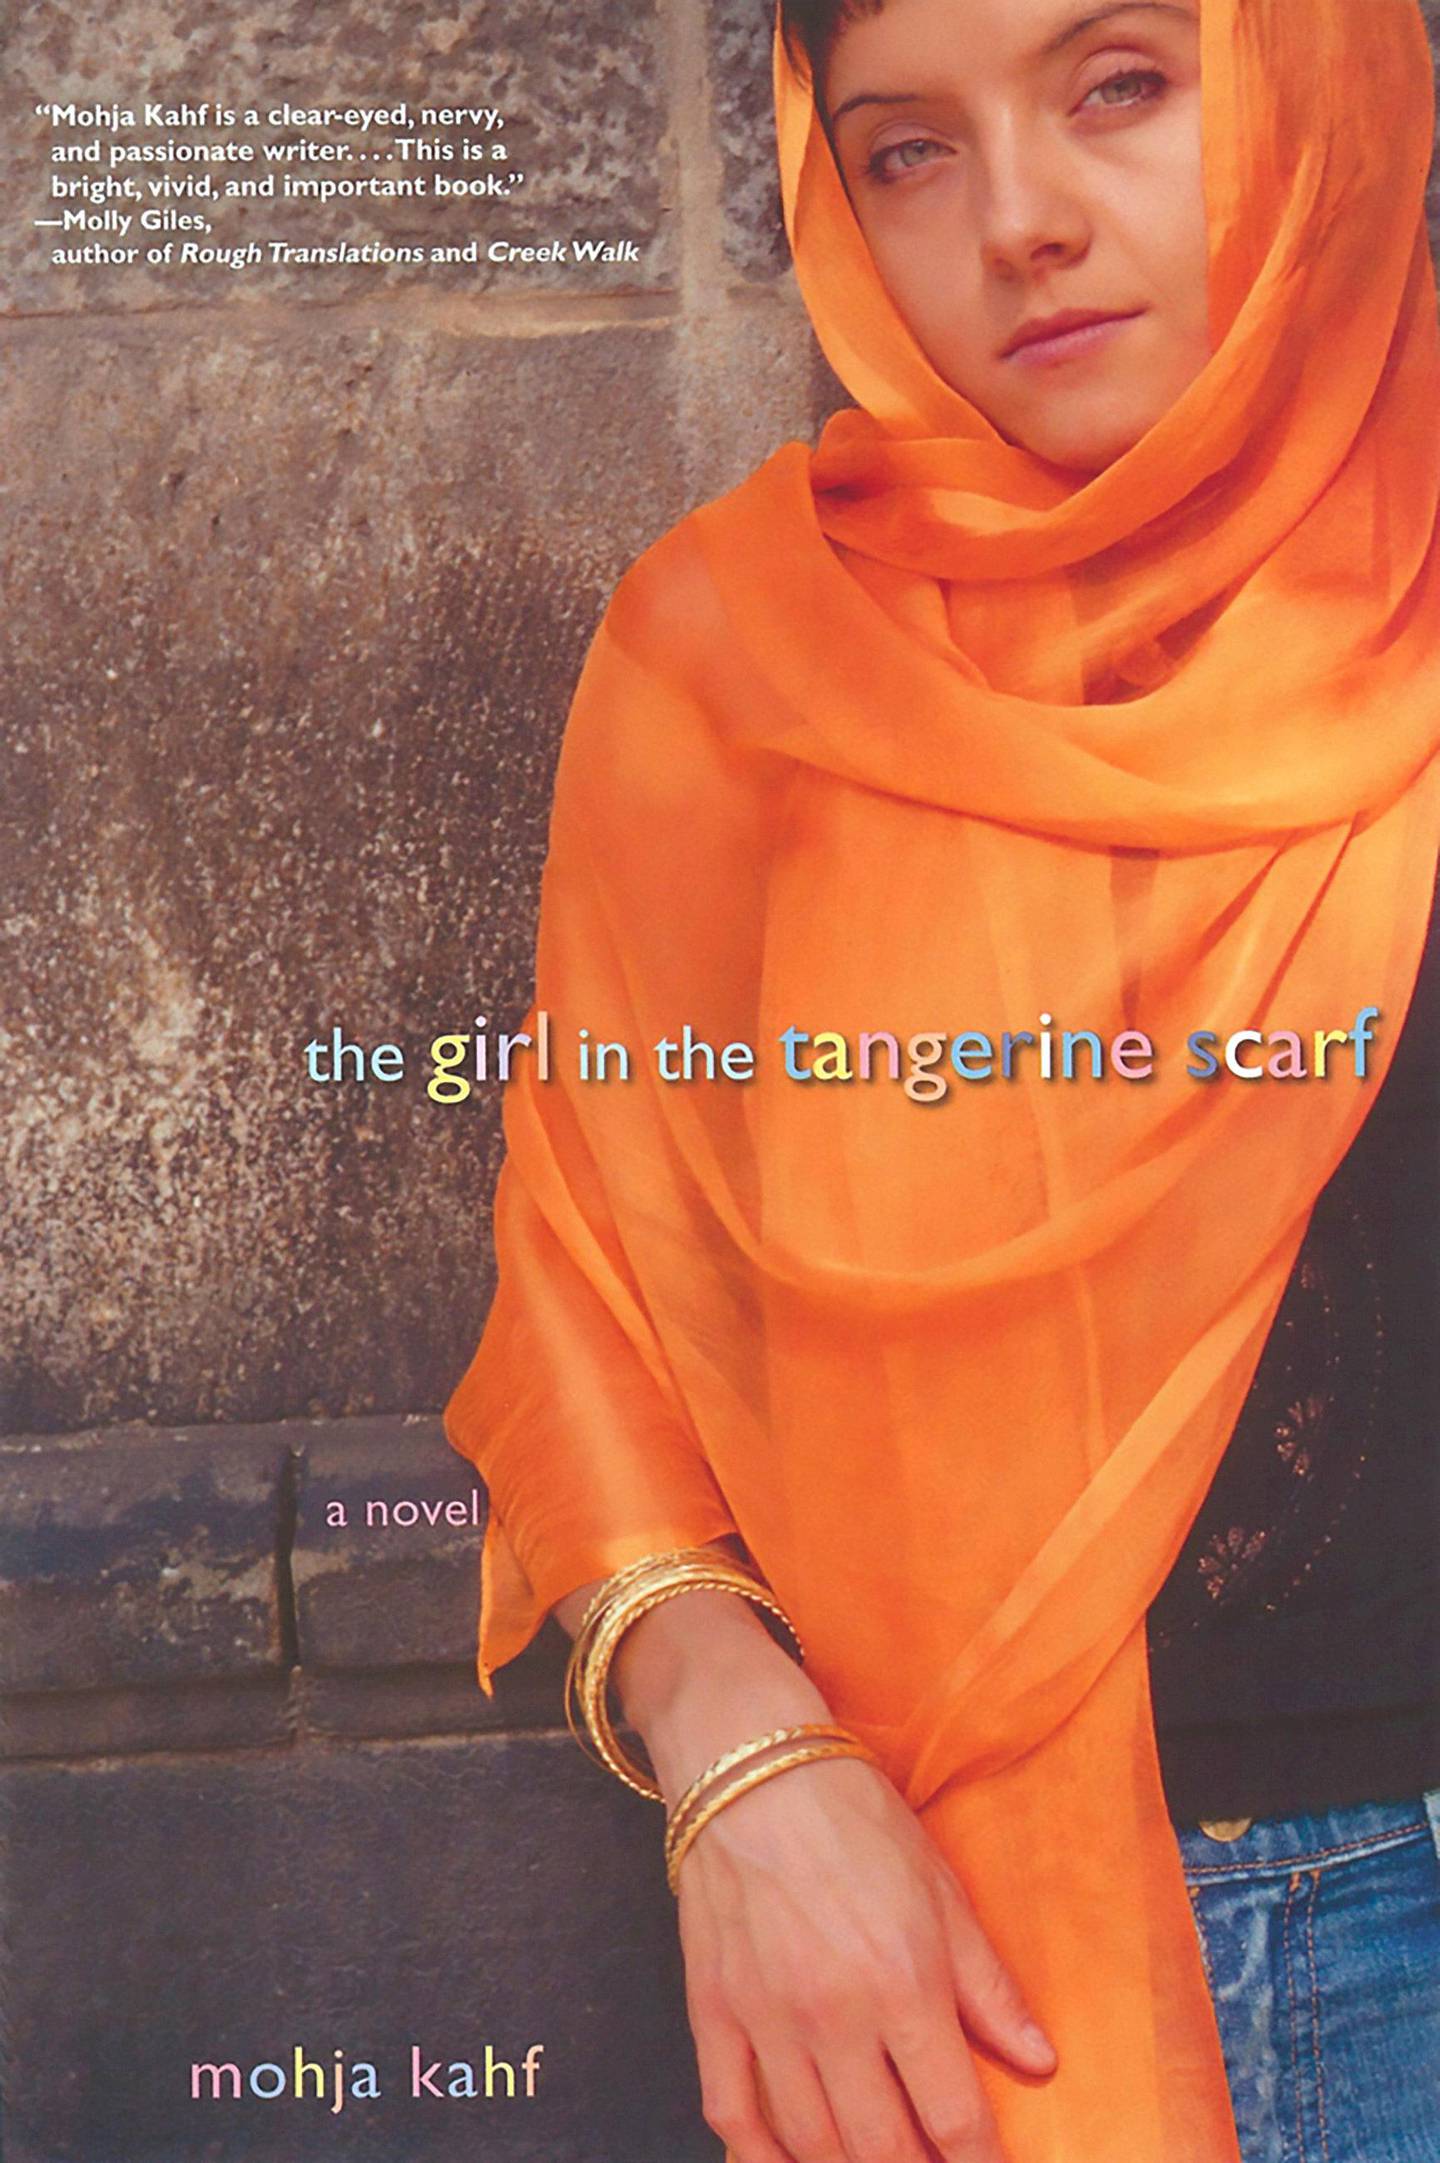 The Girl in the Tangerine Scarf: A Novel by Mojha Kahf published by PublicAffairs. Courtesy Hachette